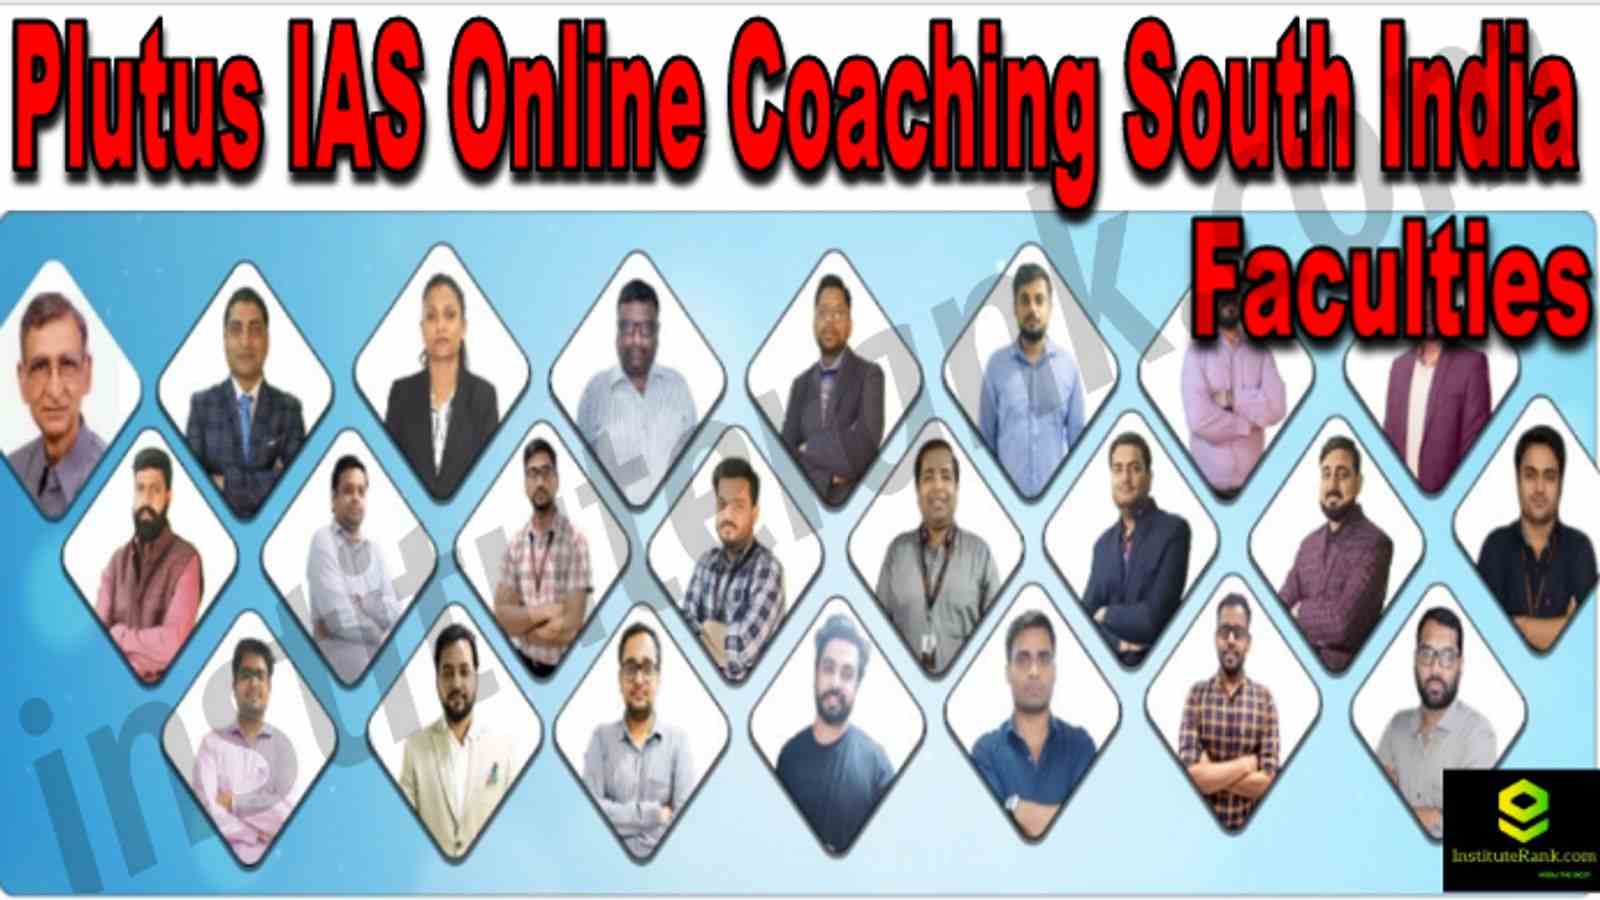 Plutus IAS Online Coaching South India Reviews Faculties